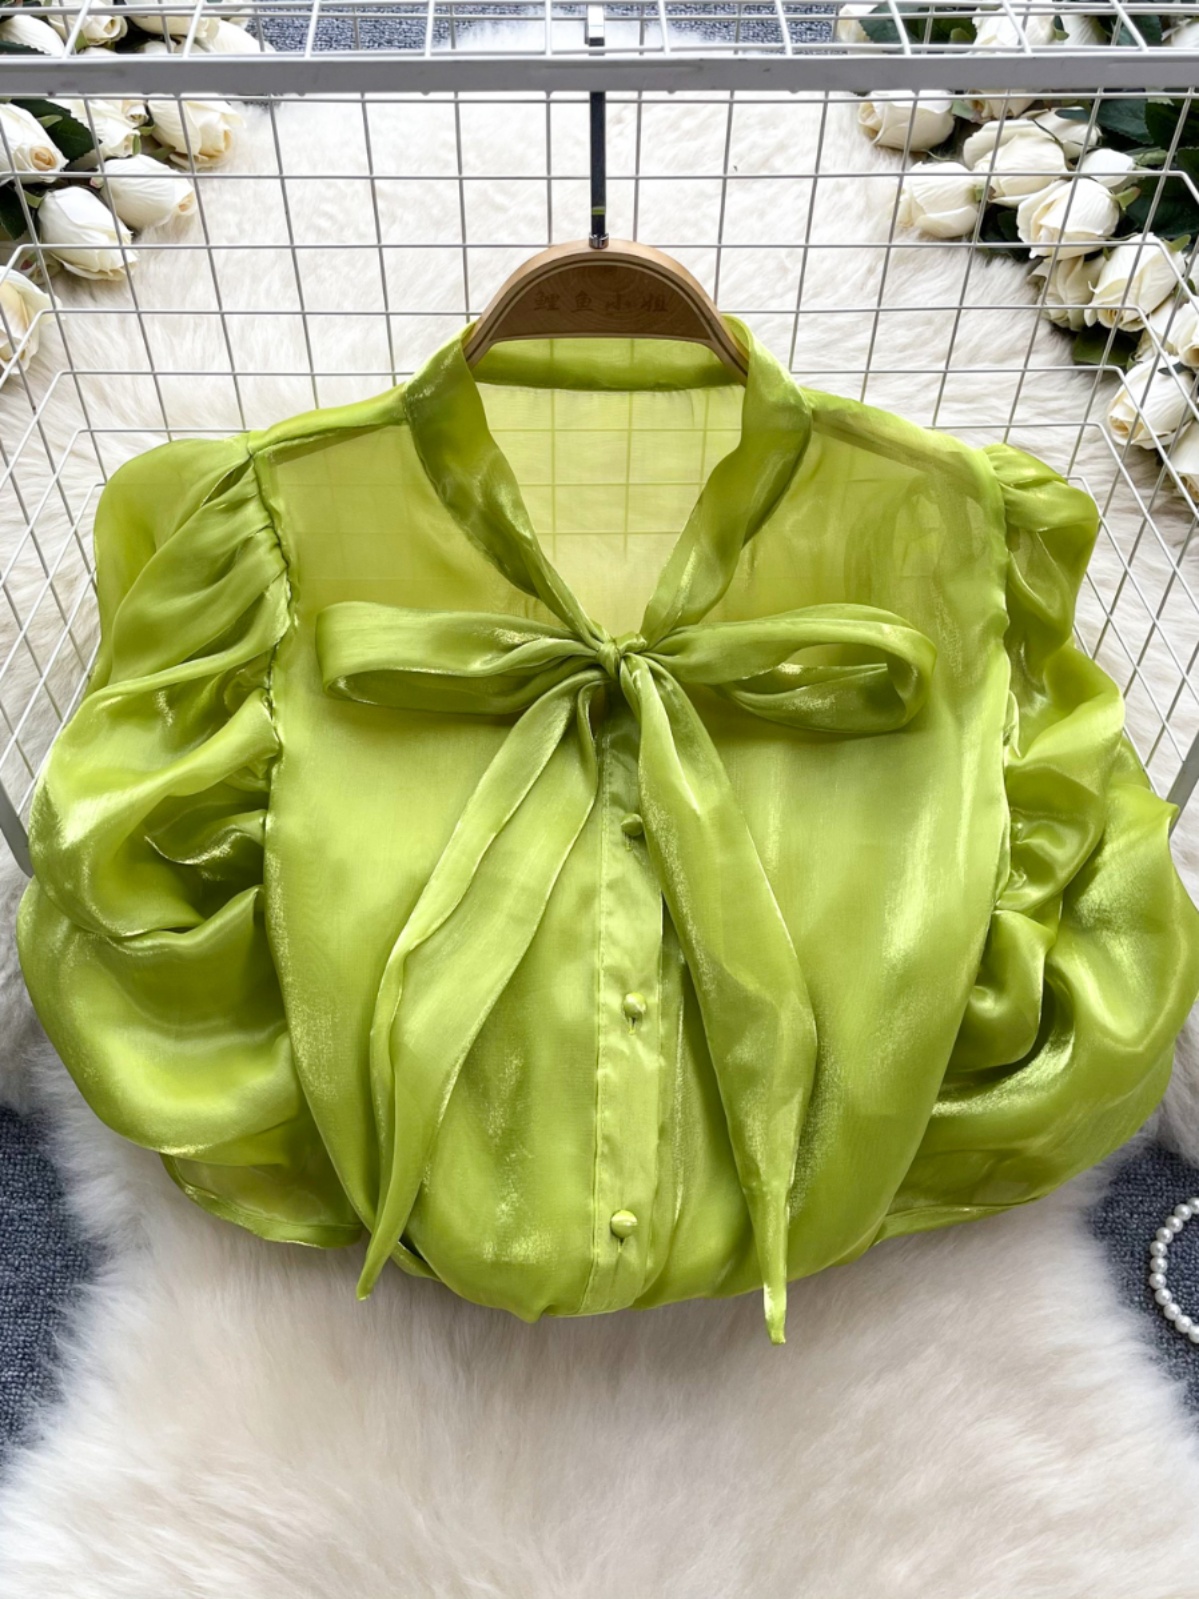 French Light Luxury High end Bubble Sleeve Shirt Women's Summer Slimming Bow Tie Design Elegant and Unique Top